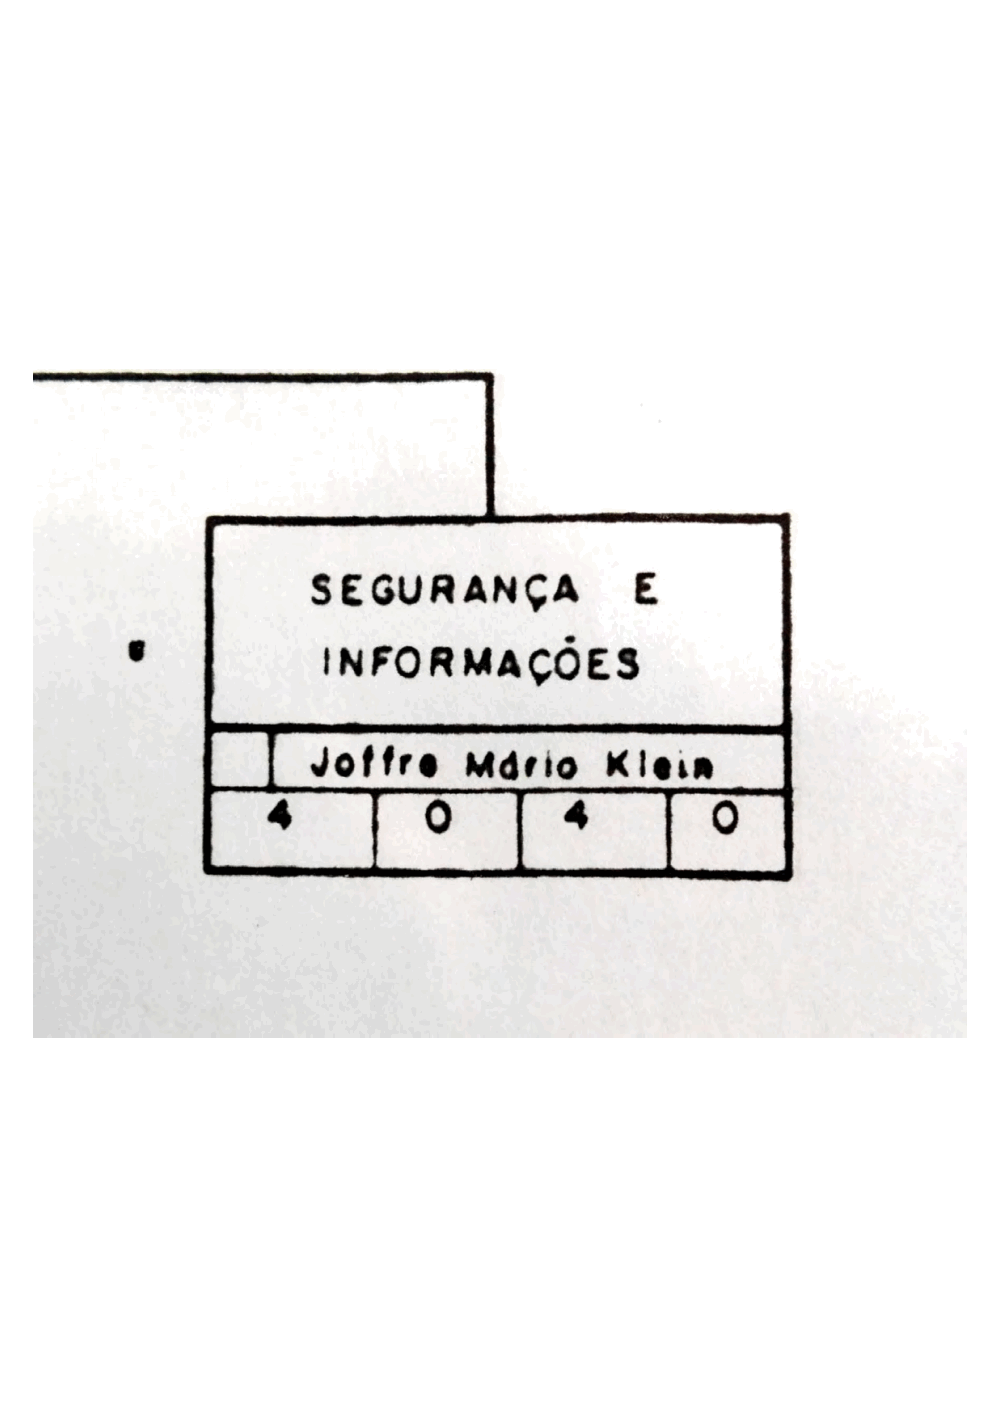 Page 3 from Archival organizational chart from Fiat’s Italian headquarters showing the Brazilian security apparatus